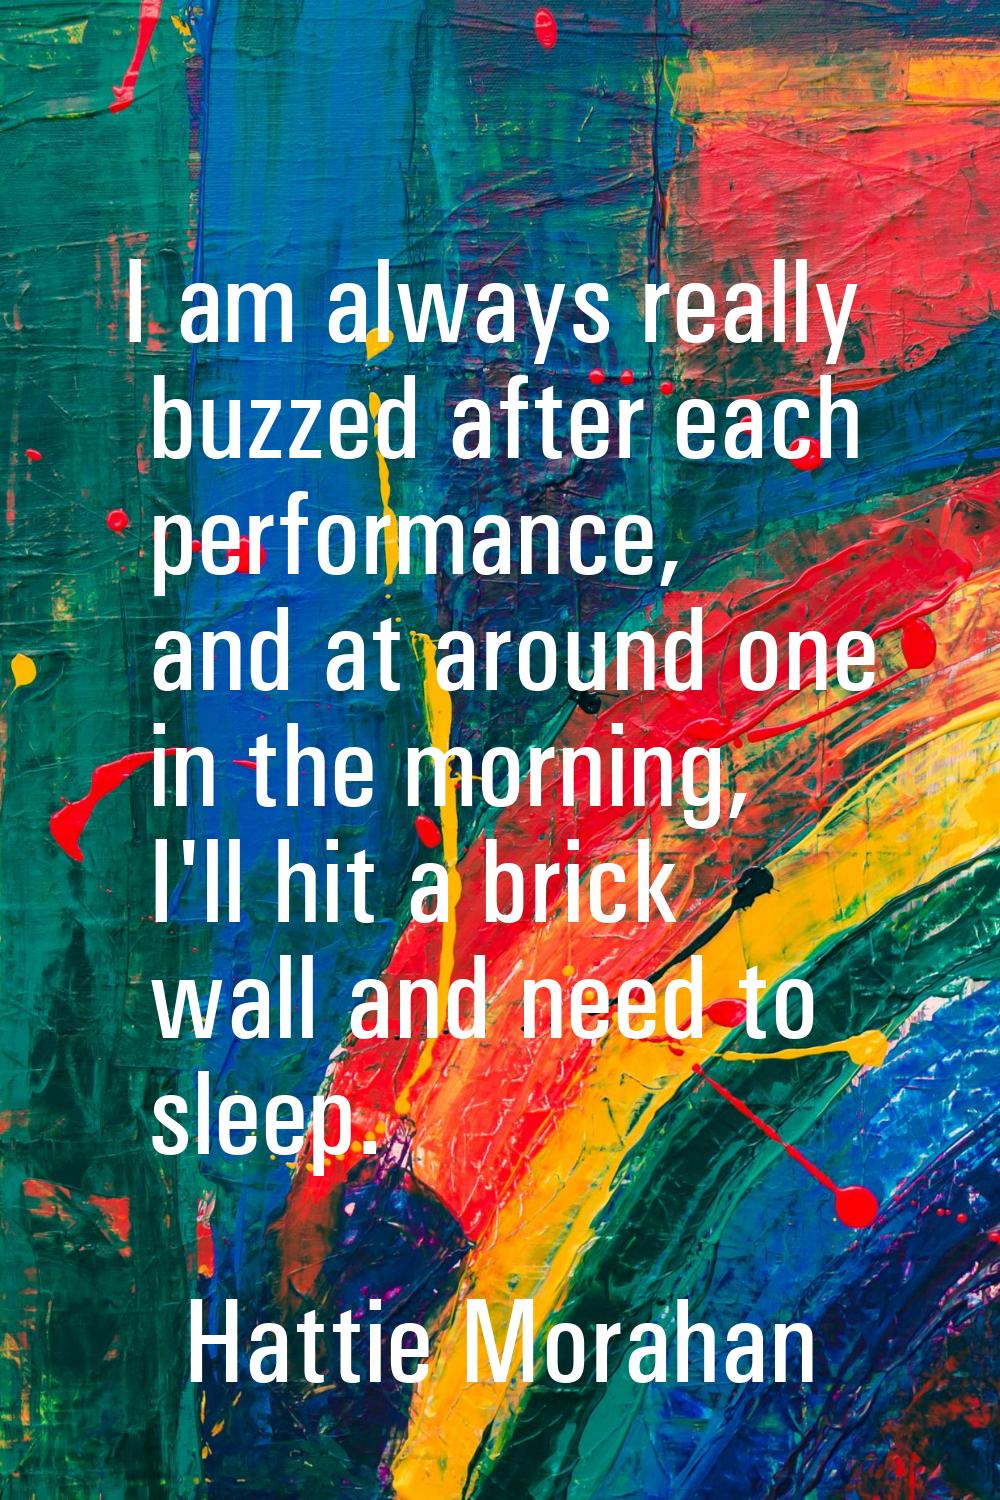 I am always really buzzed after each performance, and at around one in the morning, I'll hit a bric